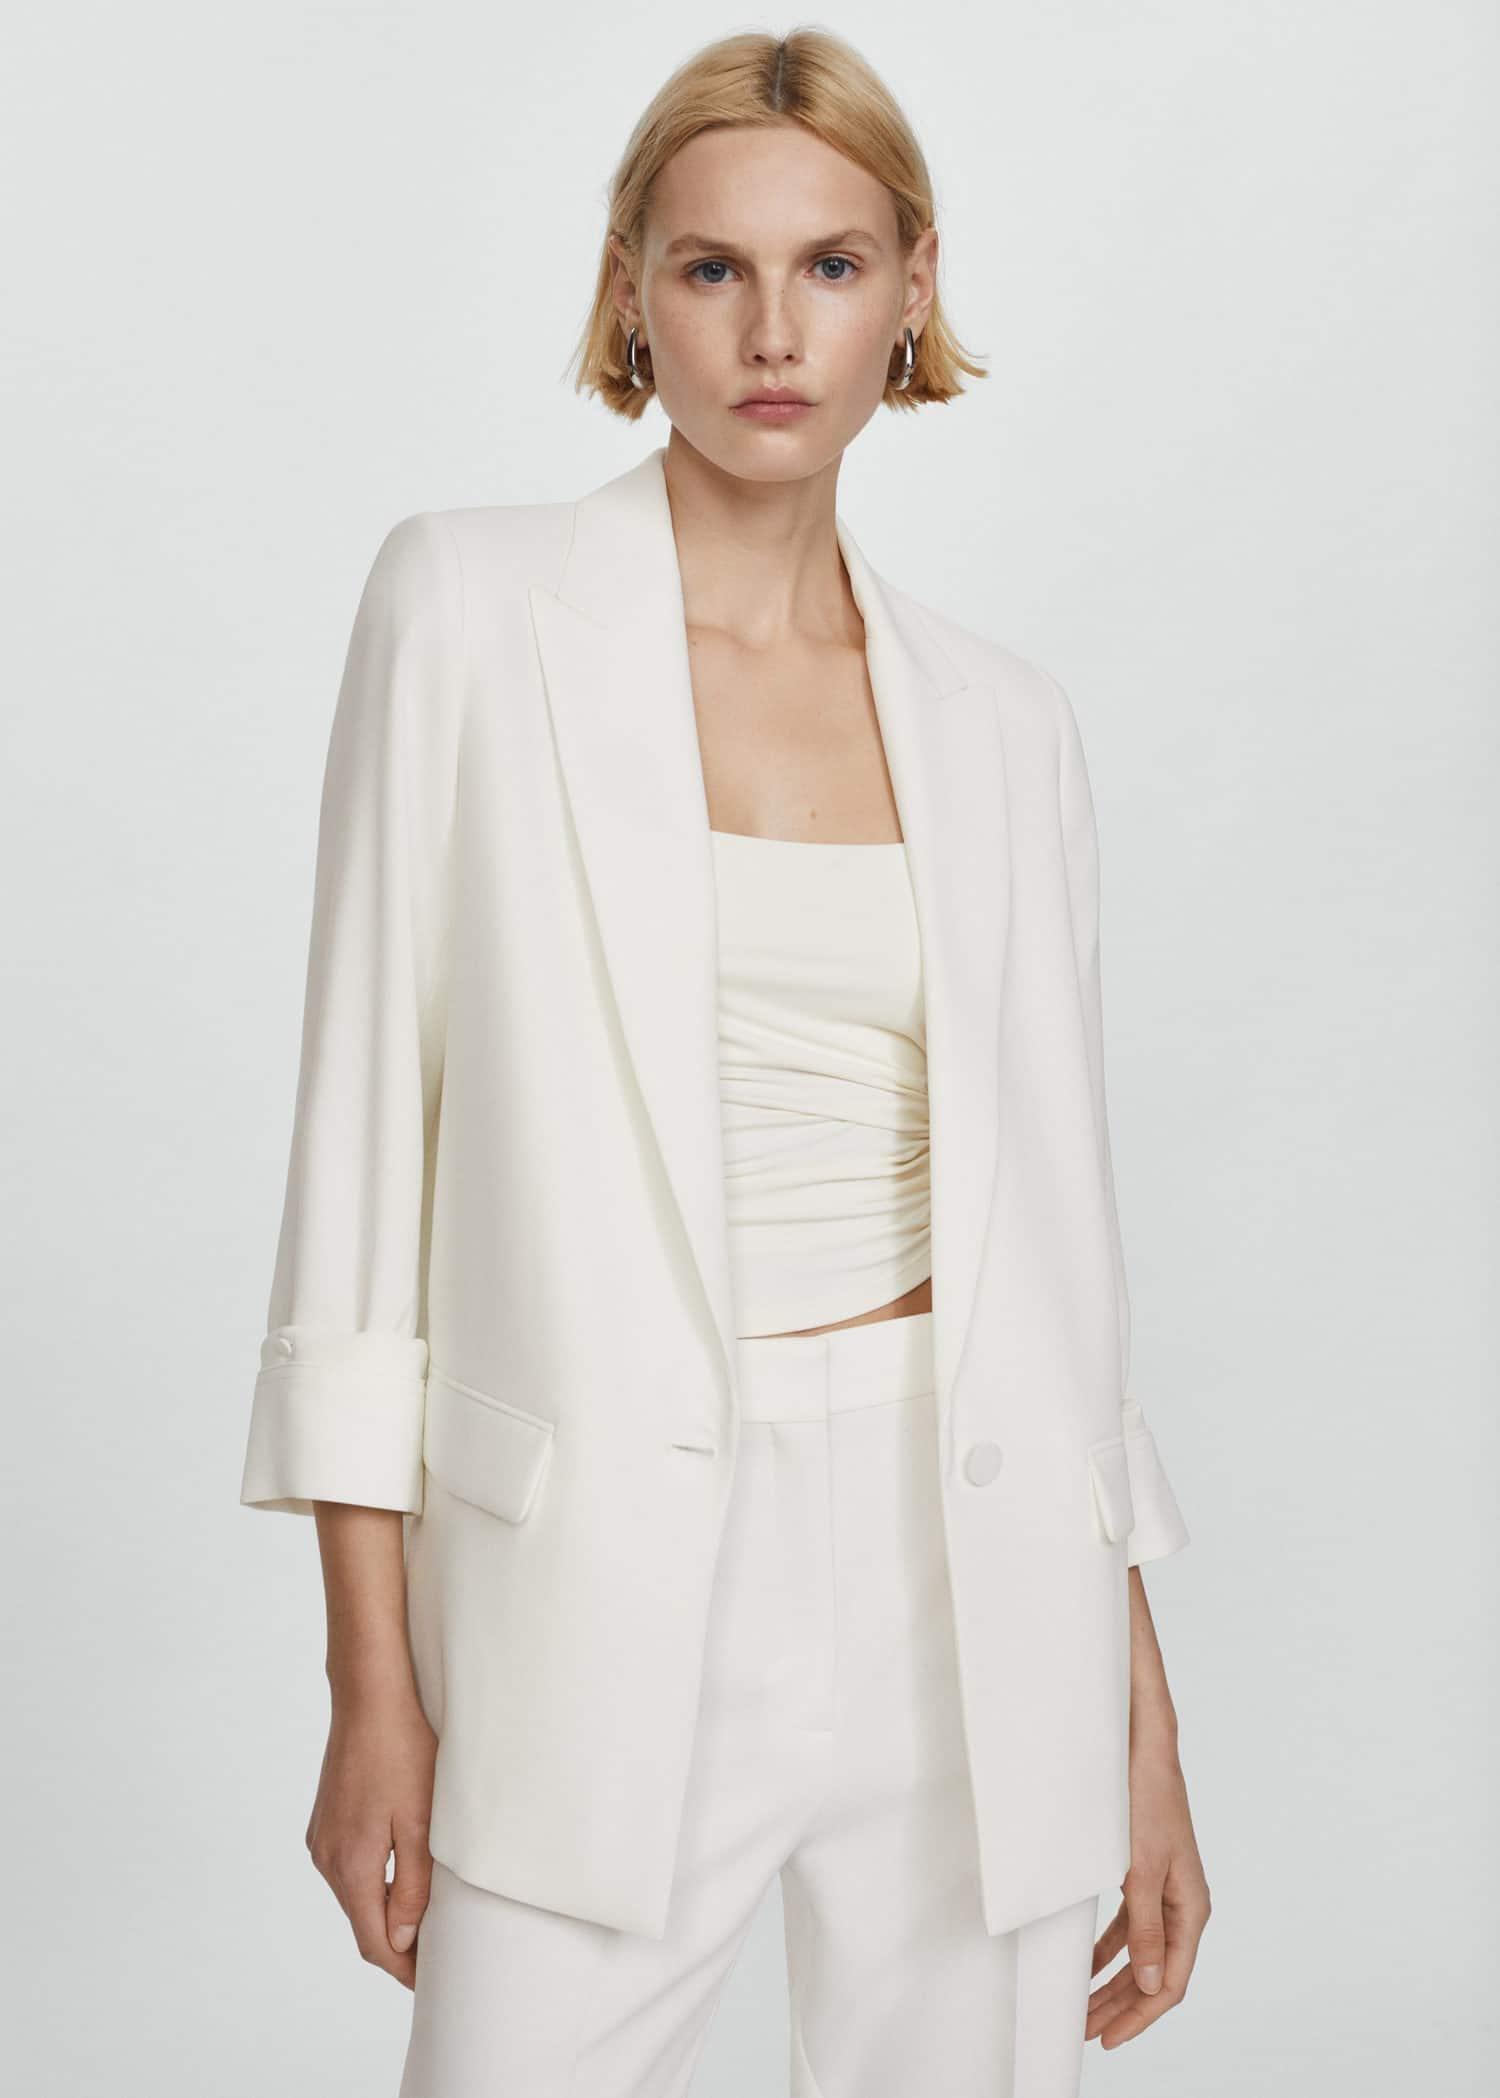 Mango - Beige Tailored Jacket With Turn-Down Sleeves